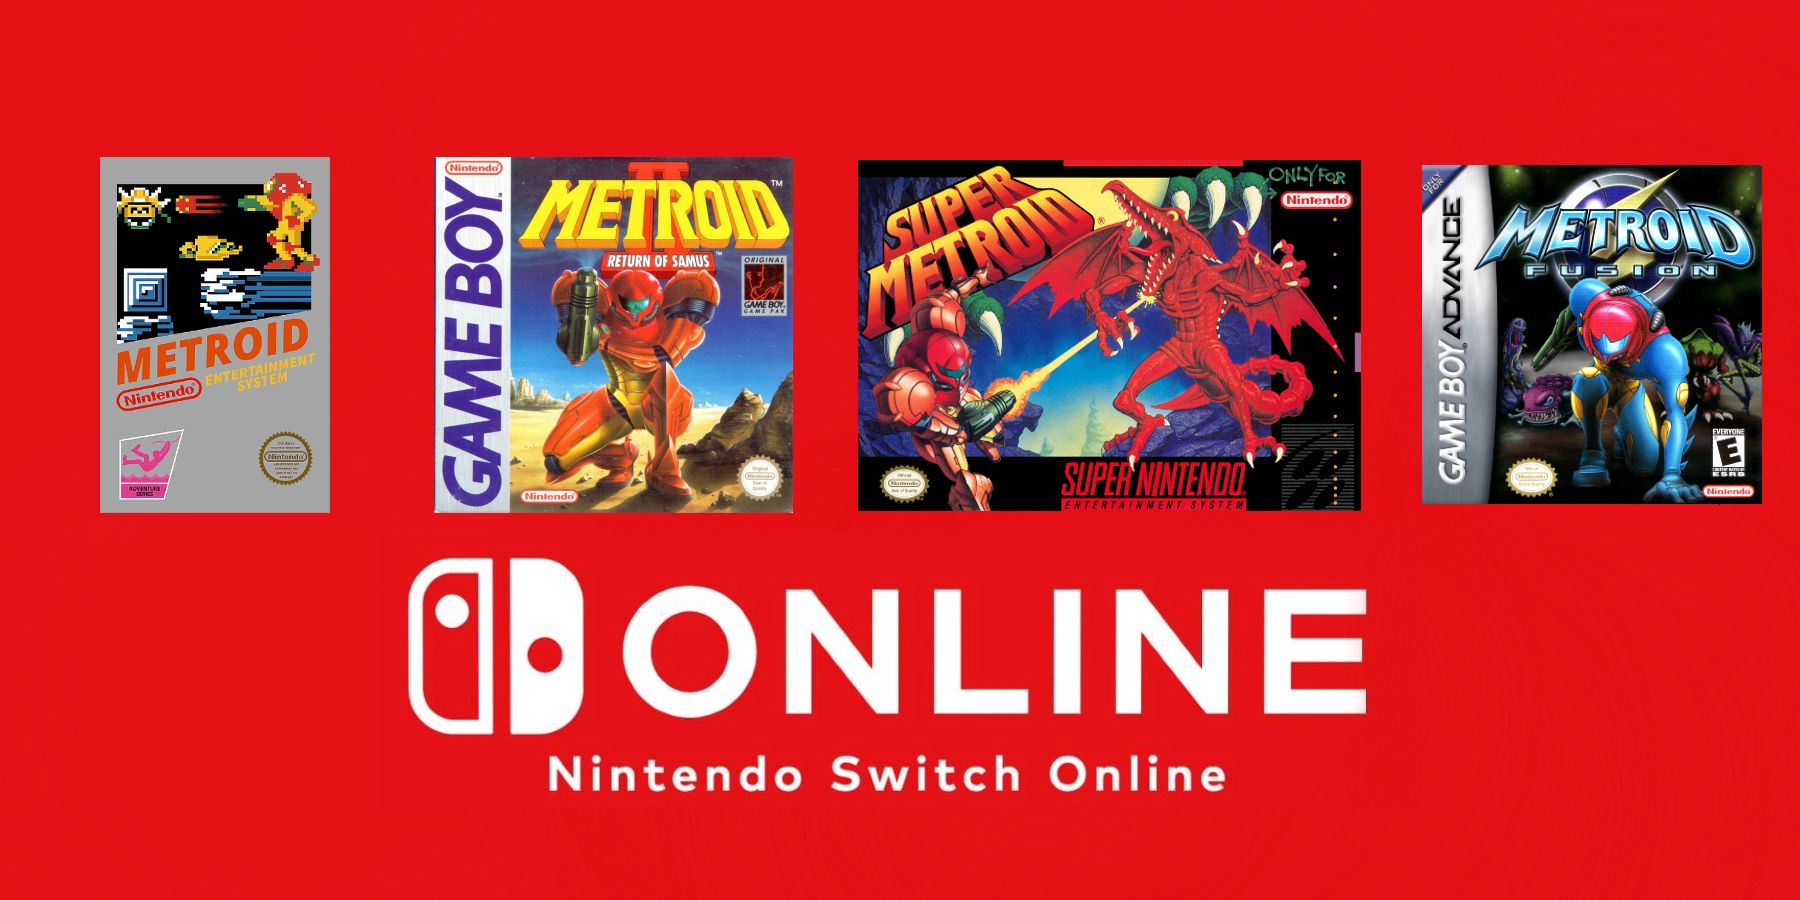 Online Continues a Heyday for Metroid's Samus